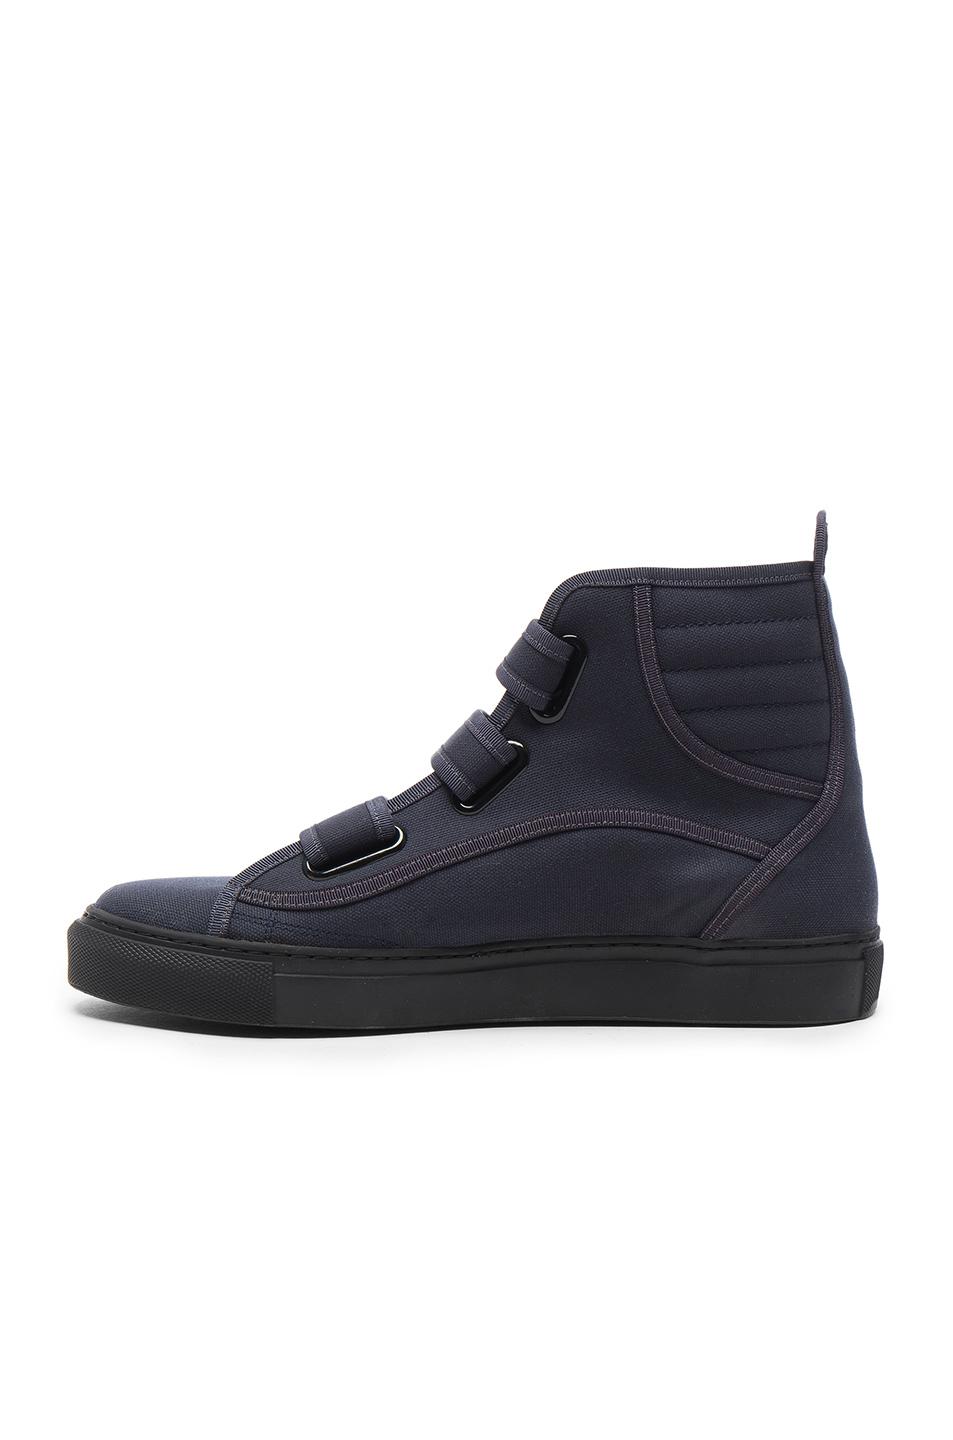 Lyst - Raf Simons High Top Velcro Sneakers in Gray